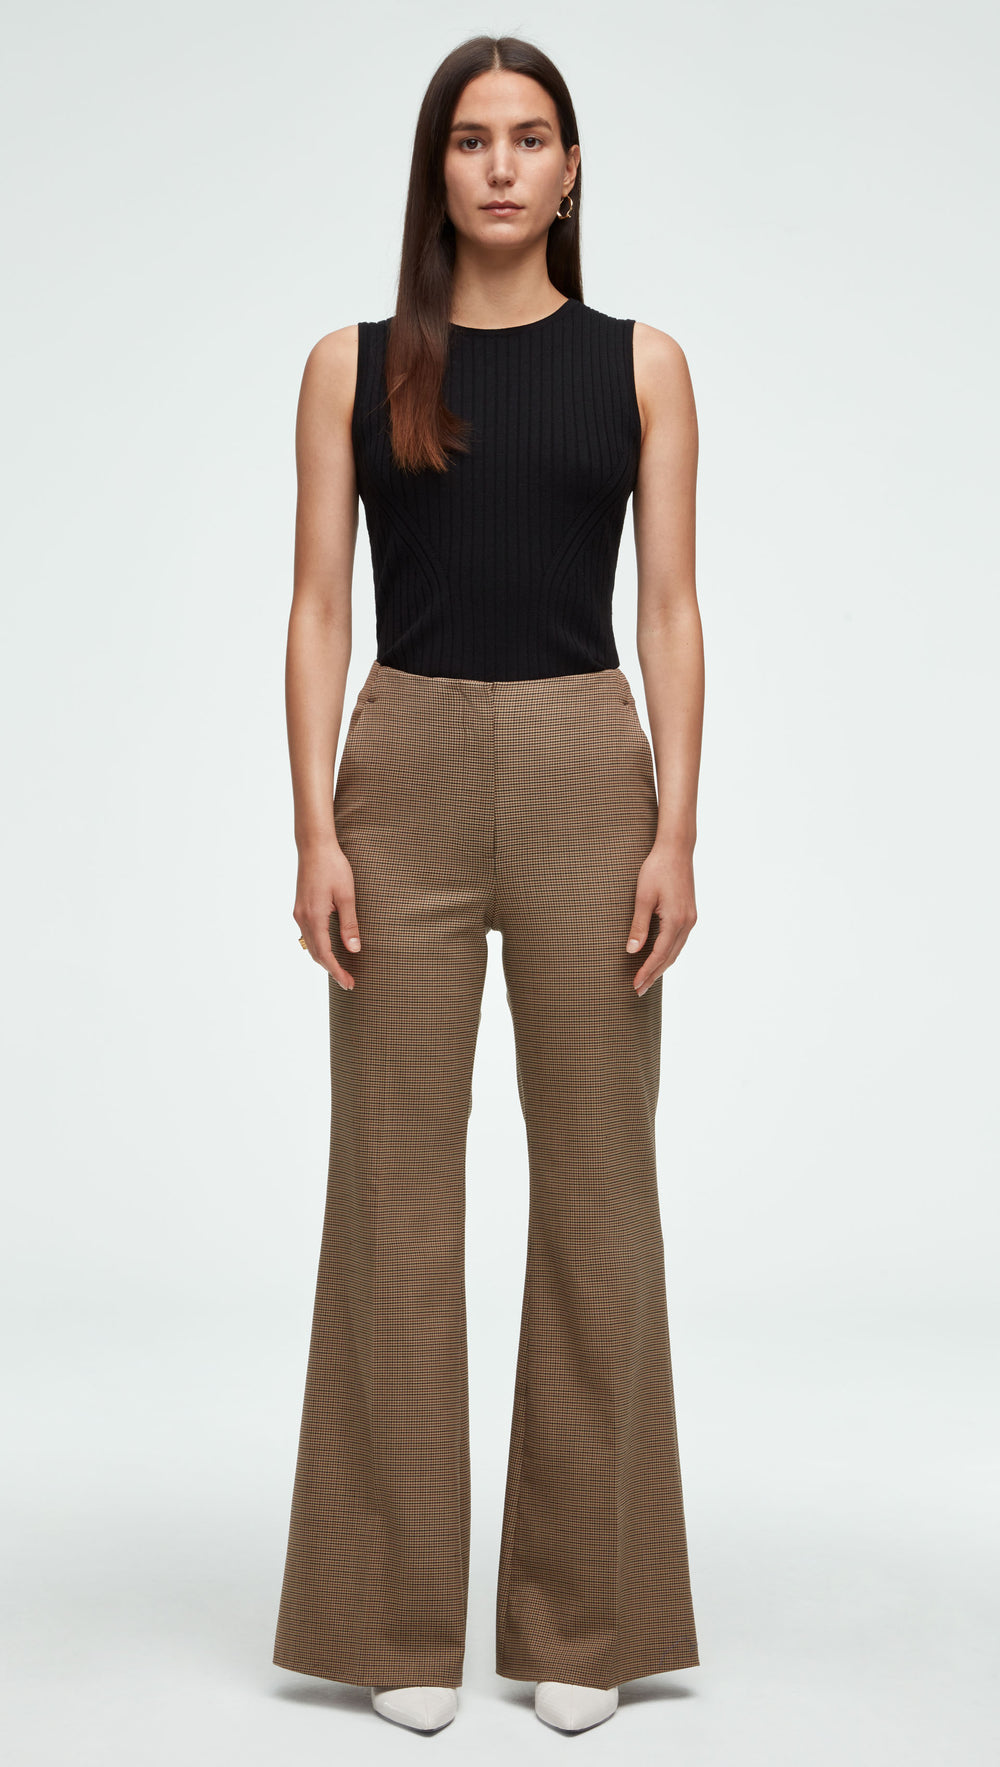 Faux Leather Flared Pants | Leather pants women, Flared pants outfit, High  waisted flare pants